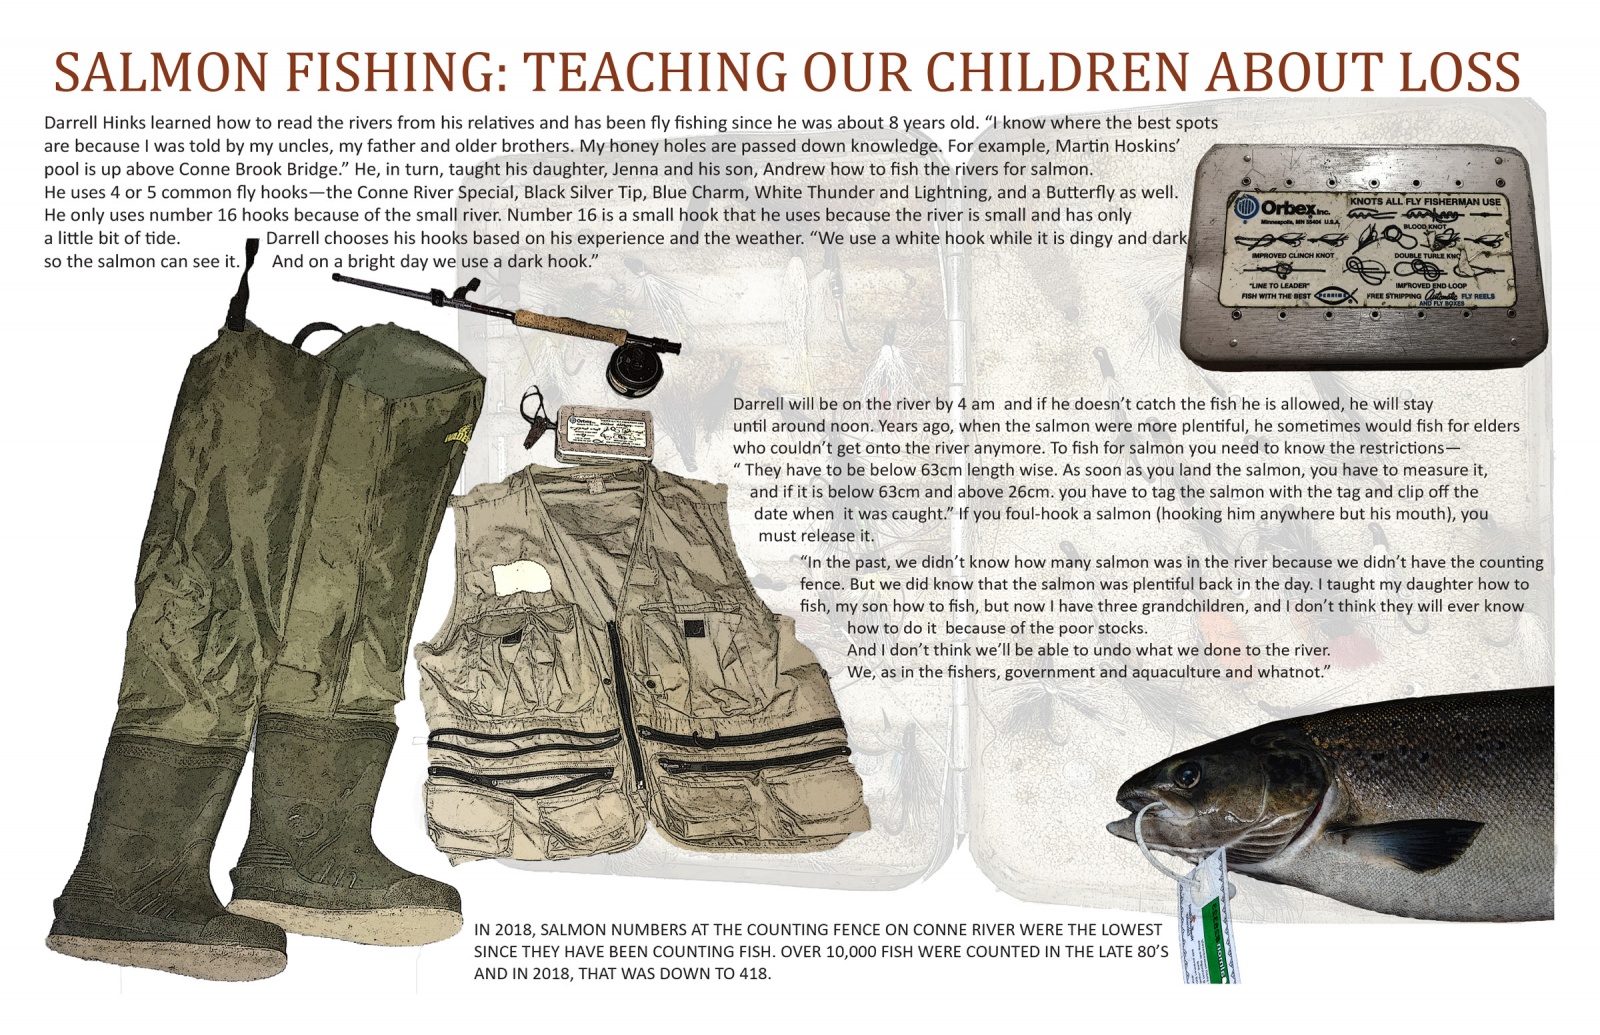 Salmon Fishing: Teaching Our Children About Loss